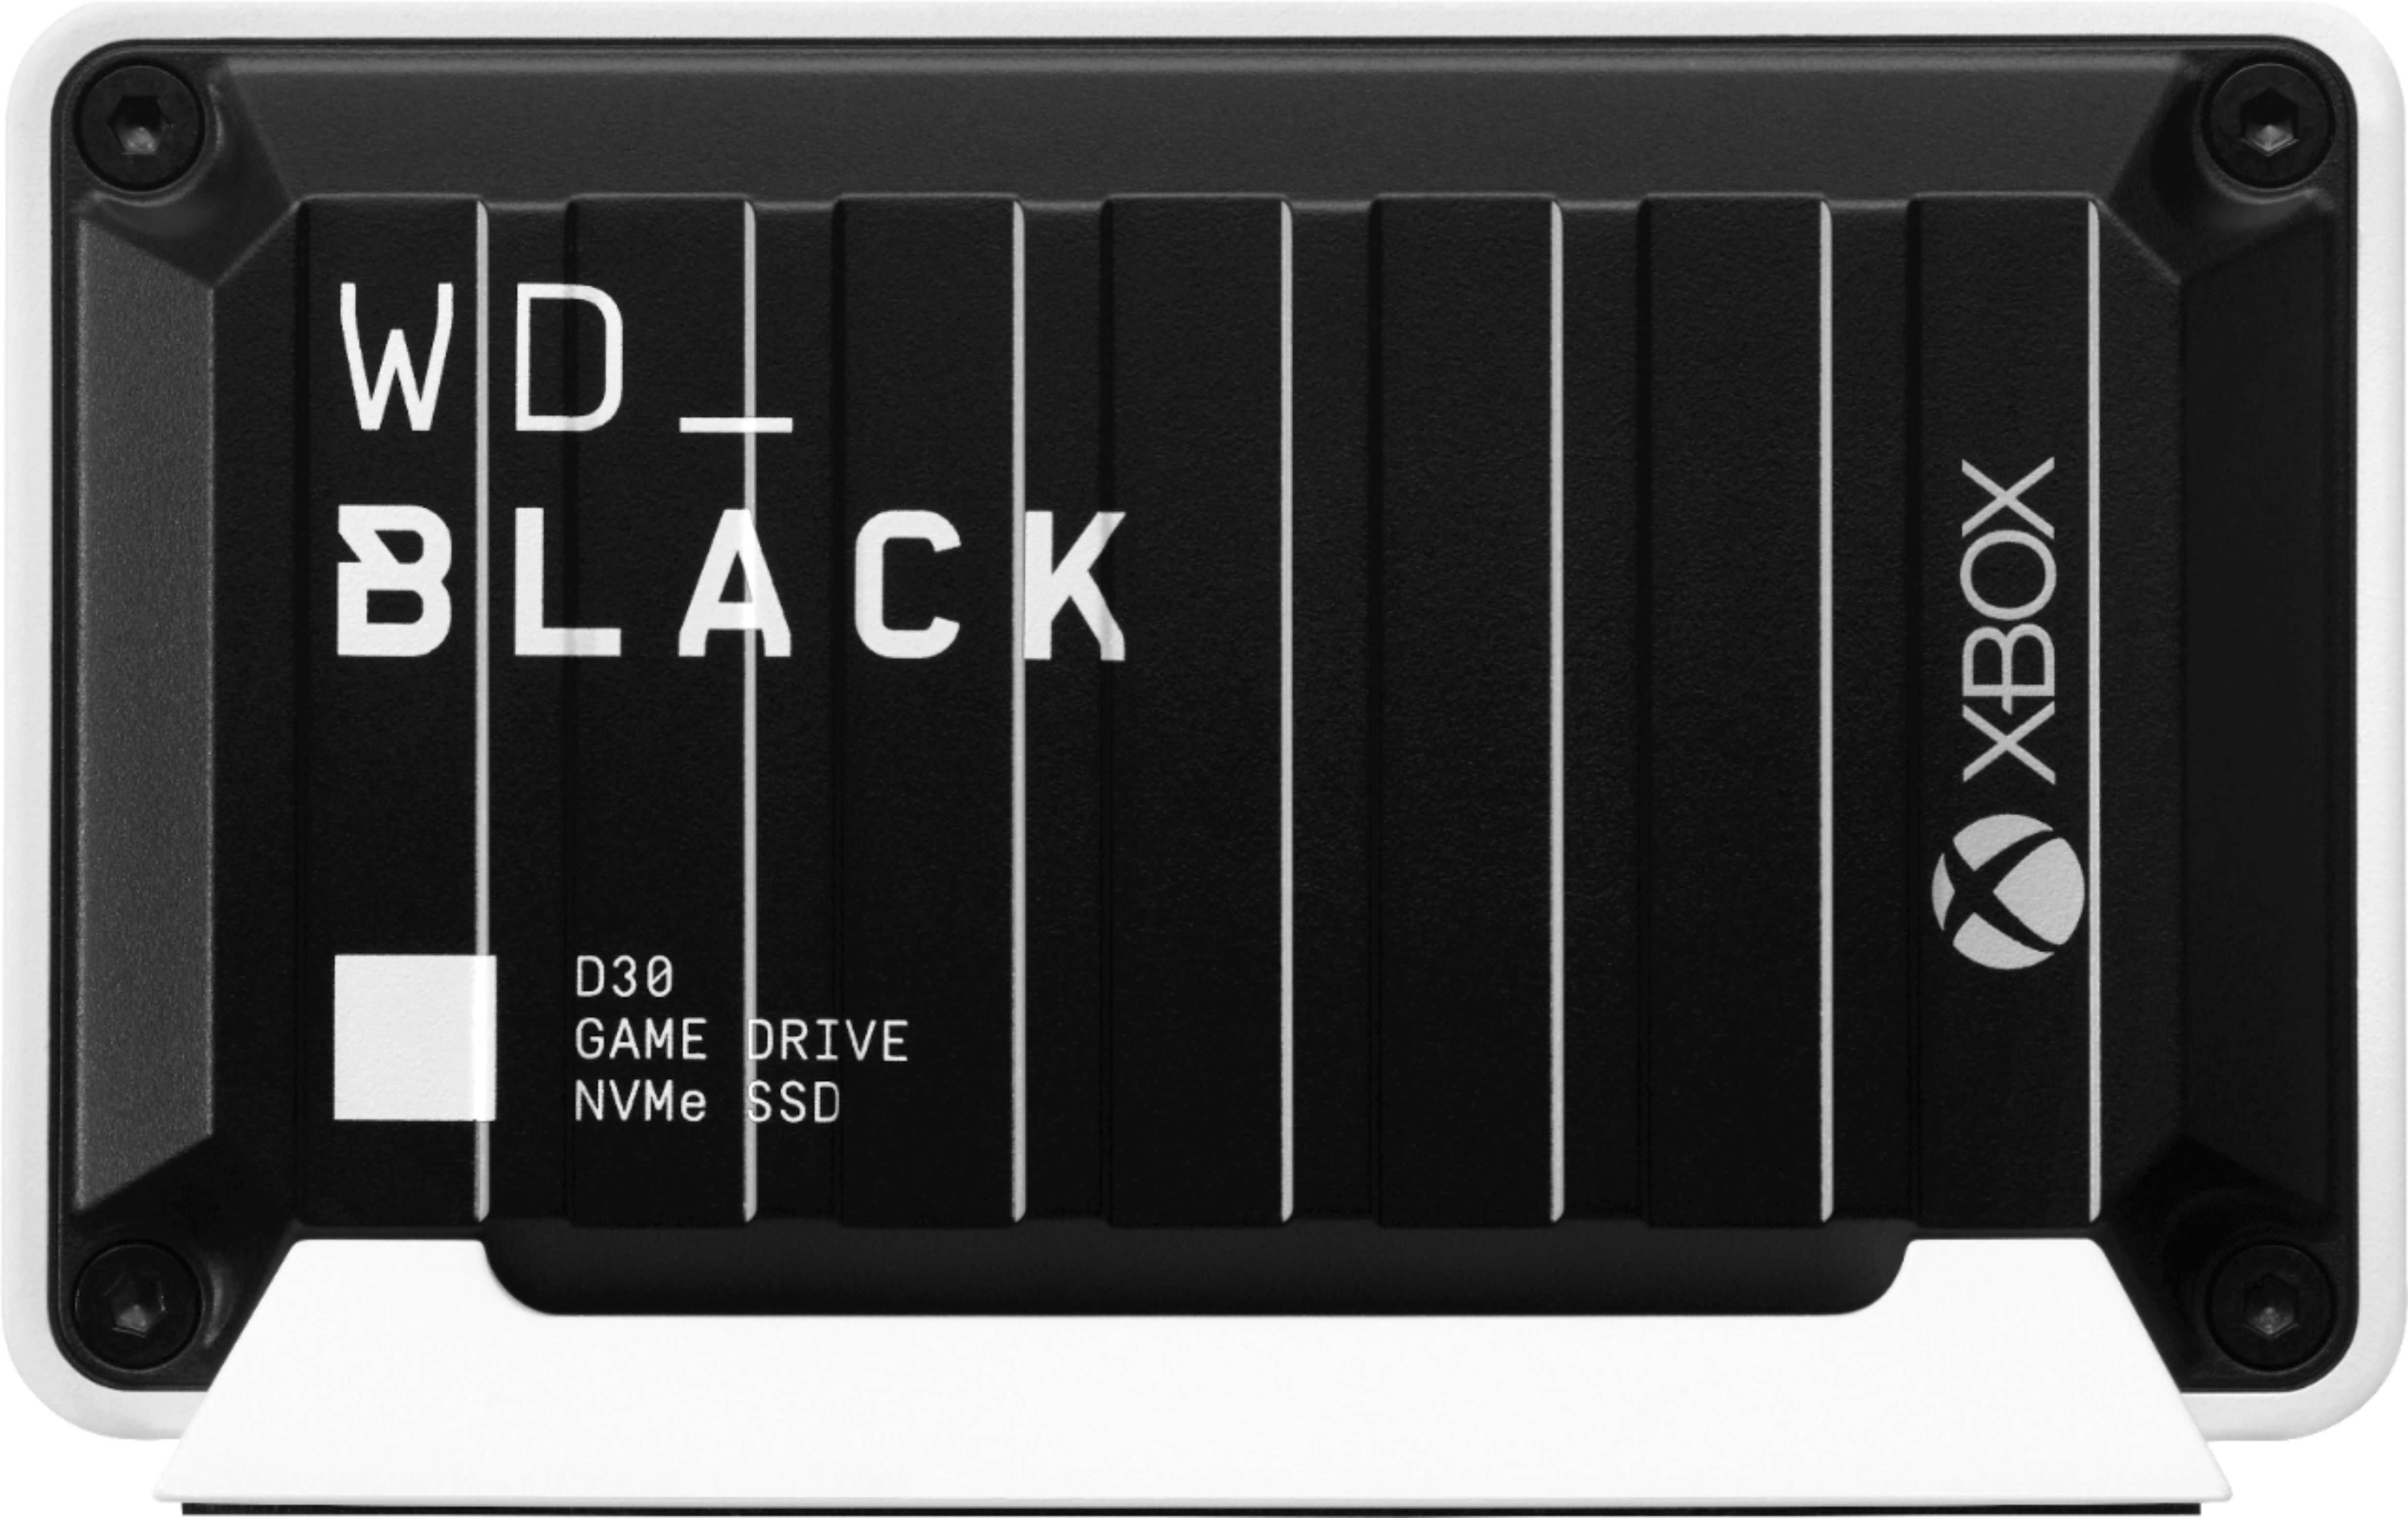 Kent Koppeling Gepland WD D30 1TB Game Drive for Xbox External USB Type C Portable SSD Black  WDBAMF0010BBW-WESN - Best Buy